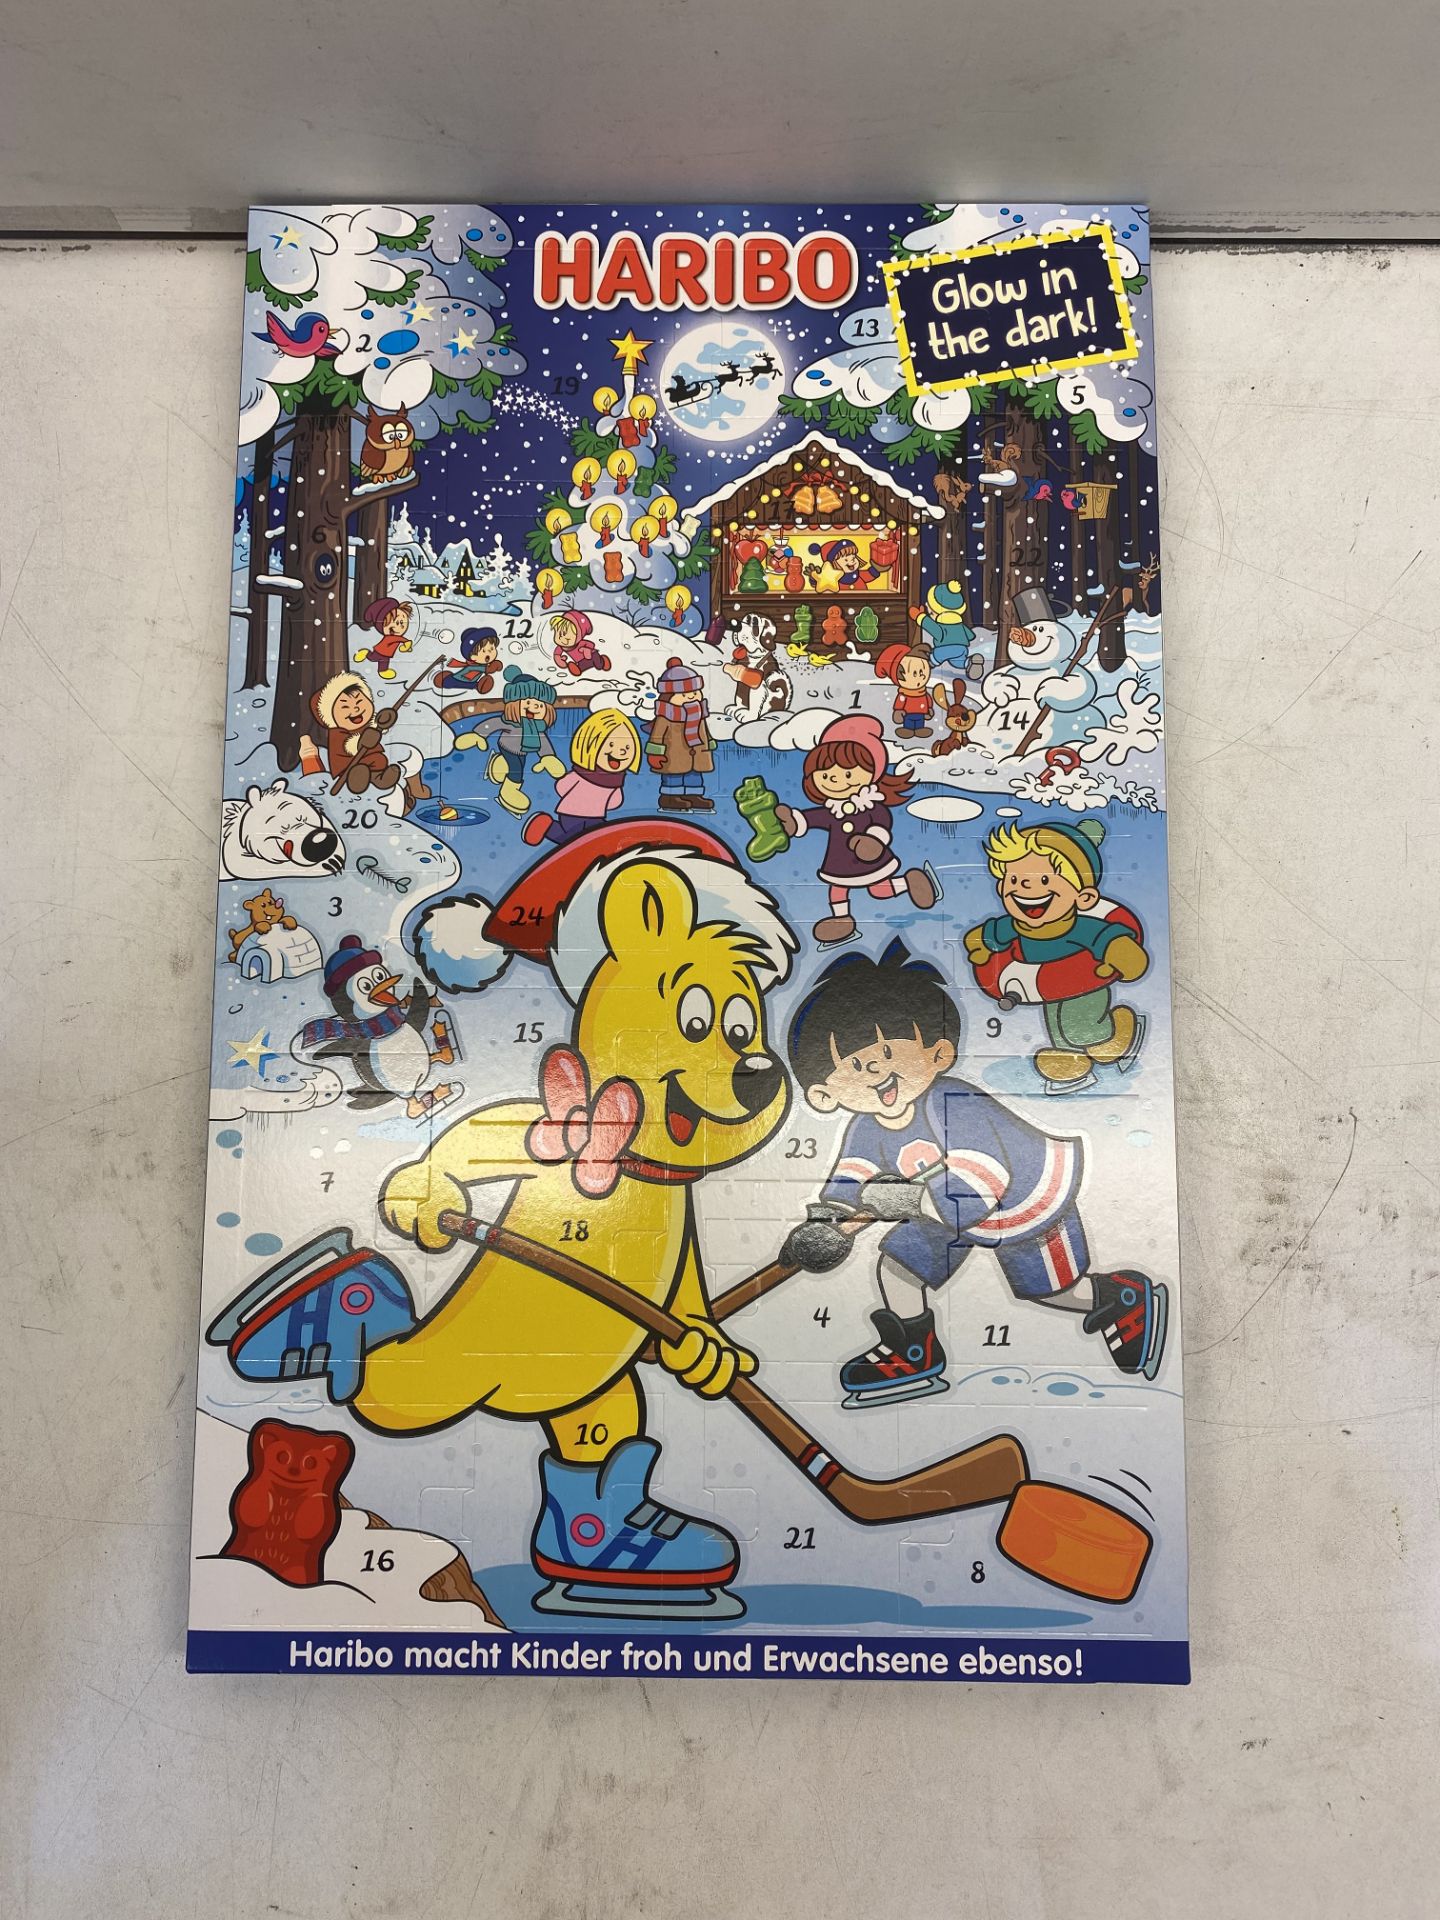 14 x Out Of Date 05/2022 Haribo Christmas Advent Calendars - Image 3 of 6